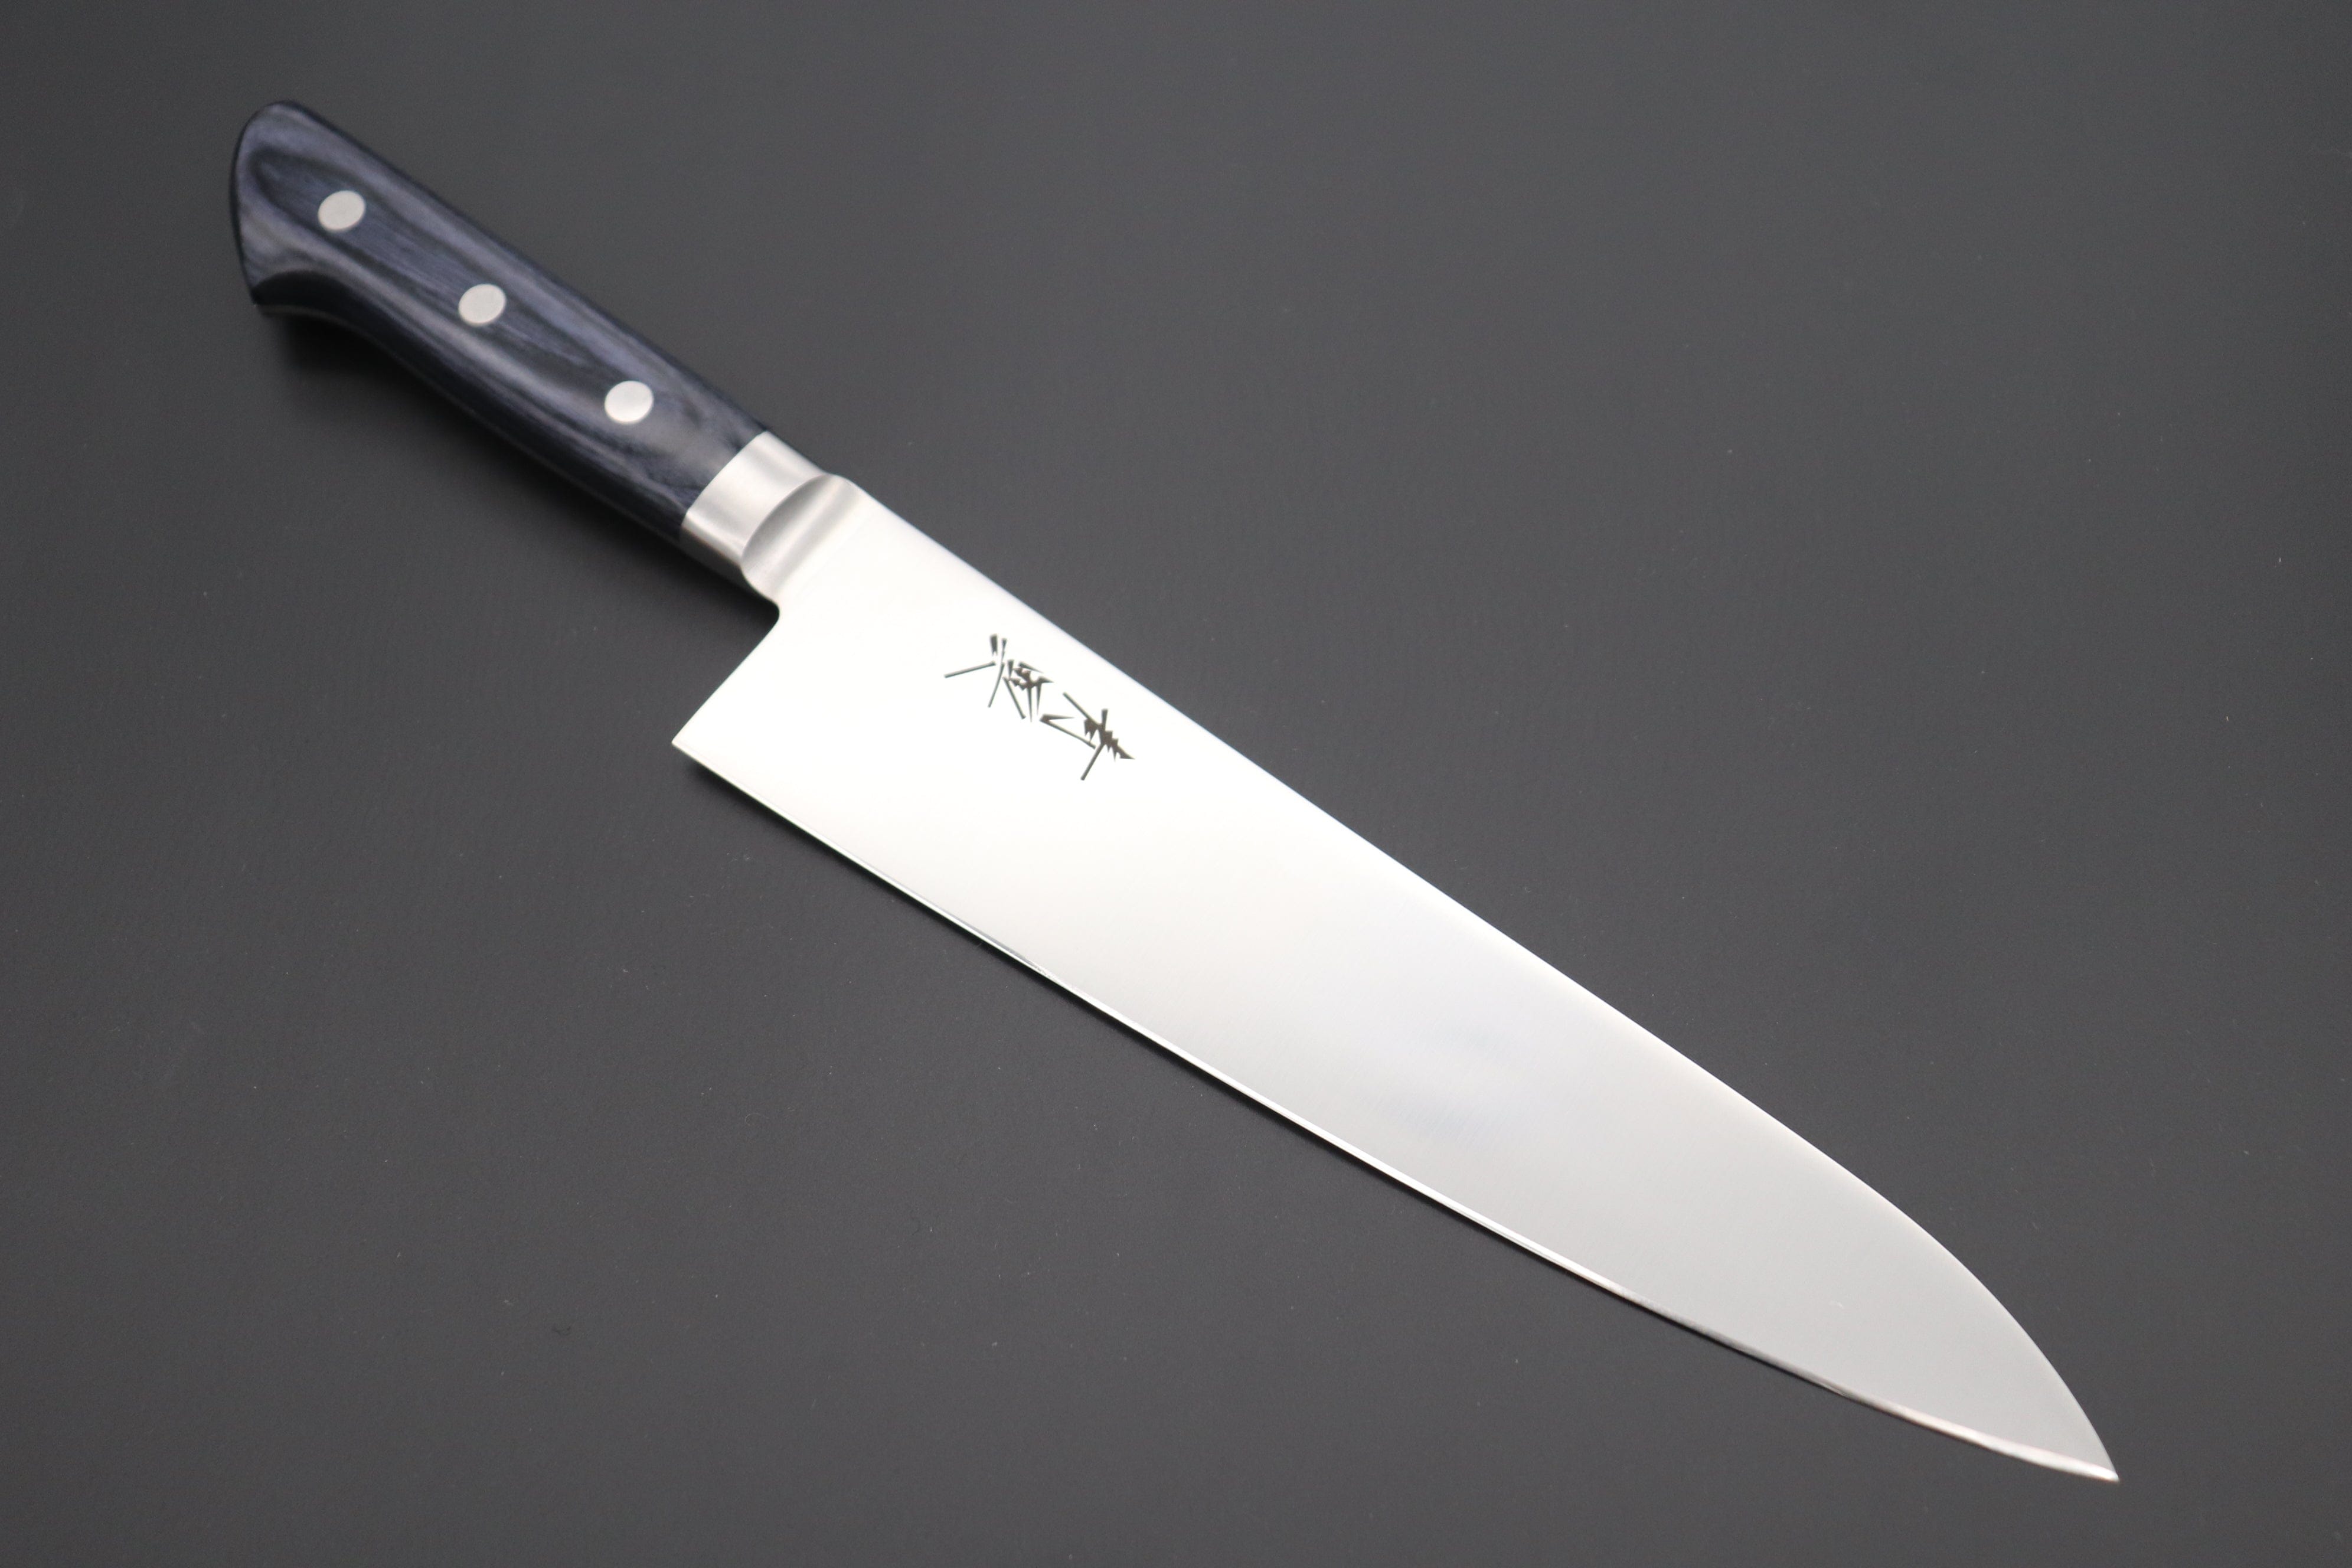  Global Model X Chef's Knife - Made in Japan, 8 (Fine